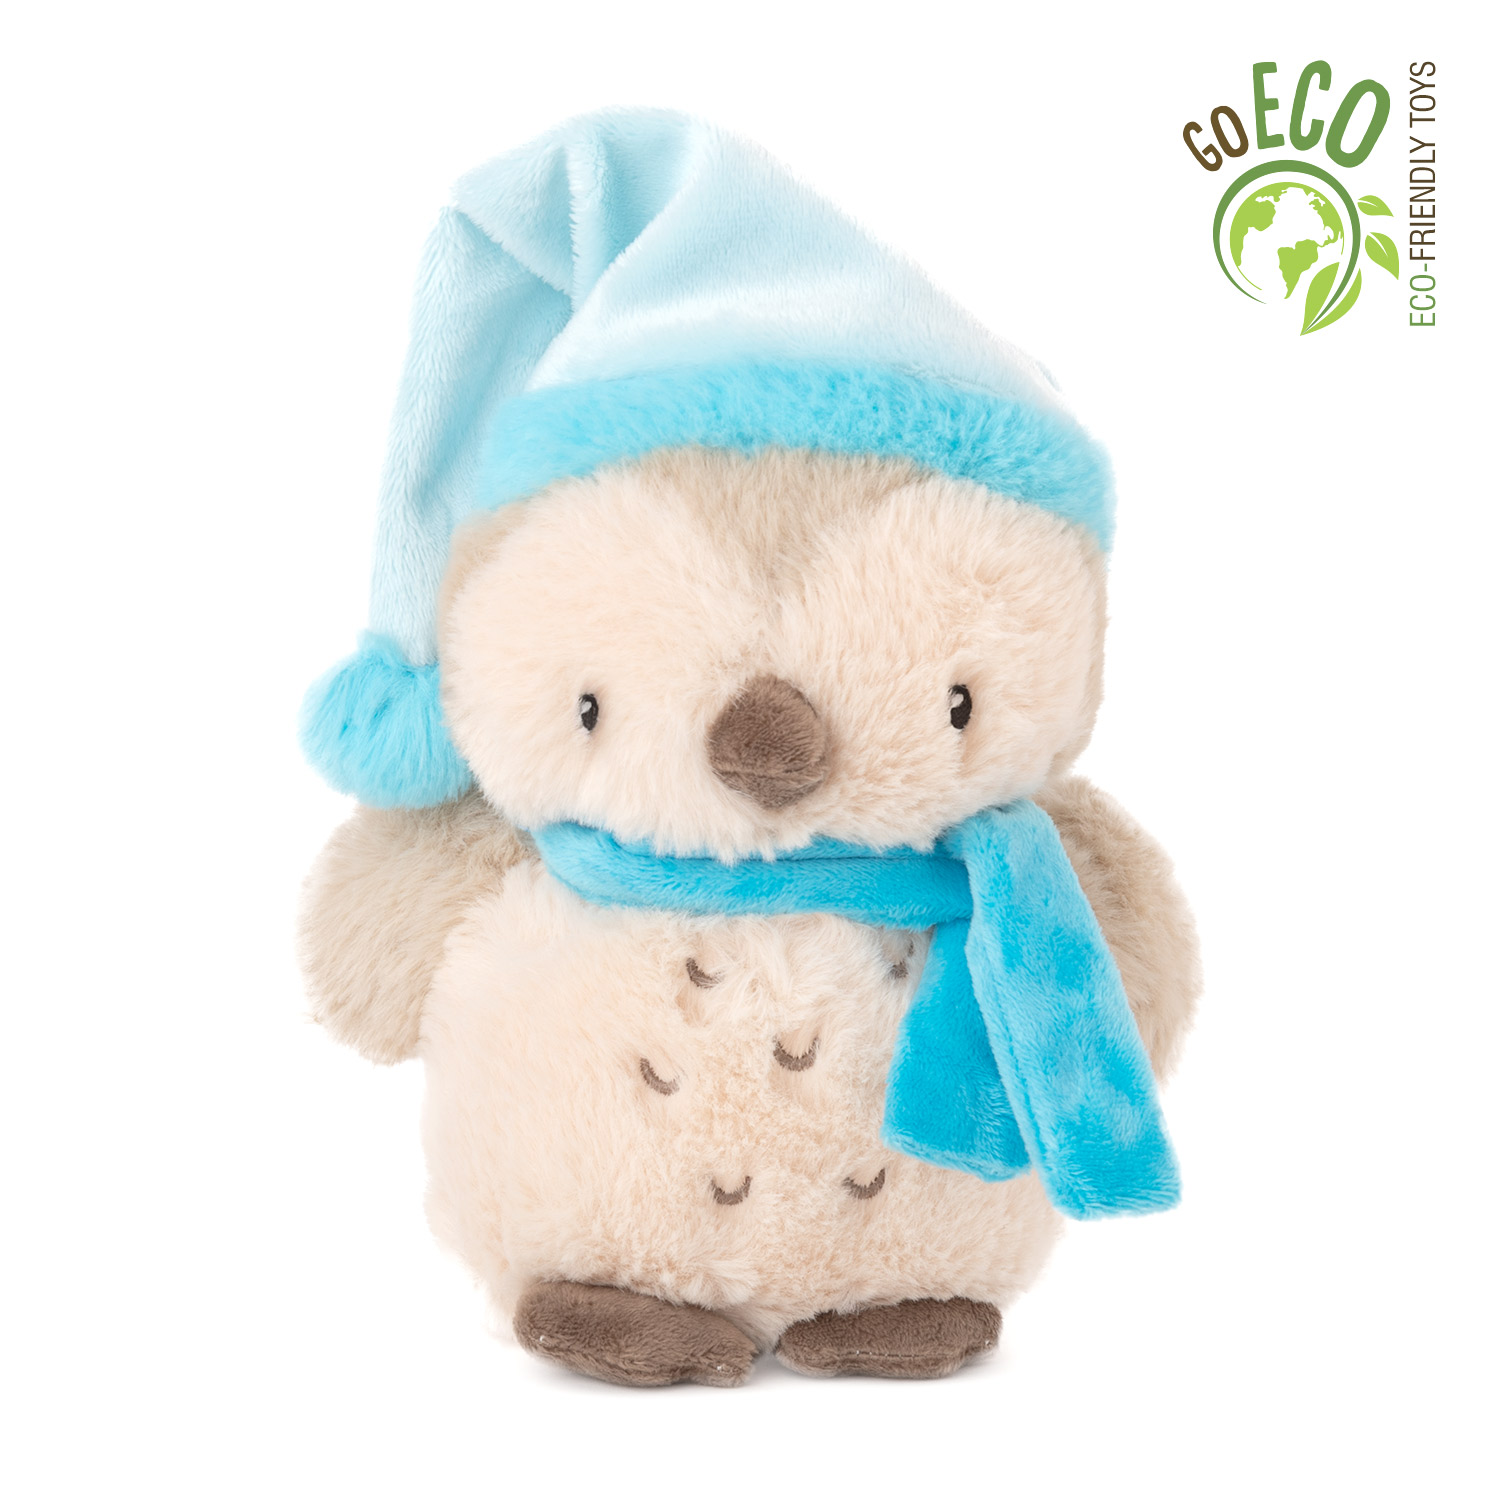 ECO Owl with blue hat and scarf